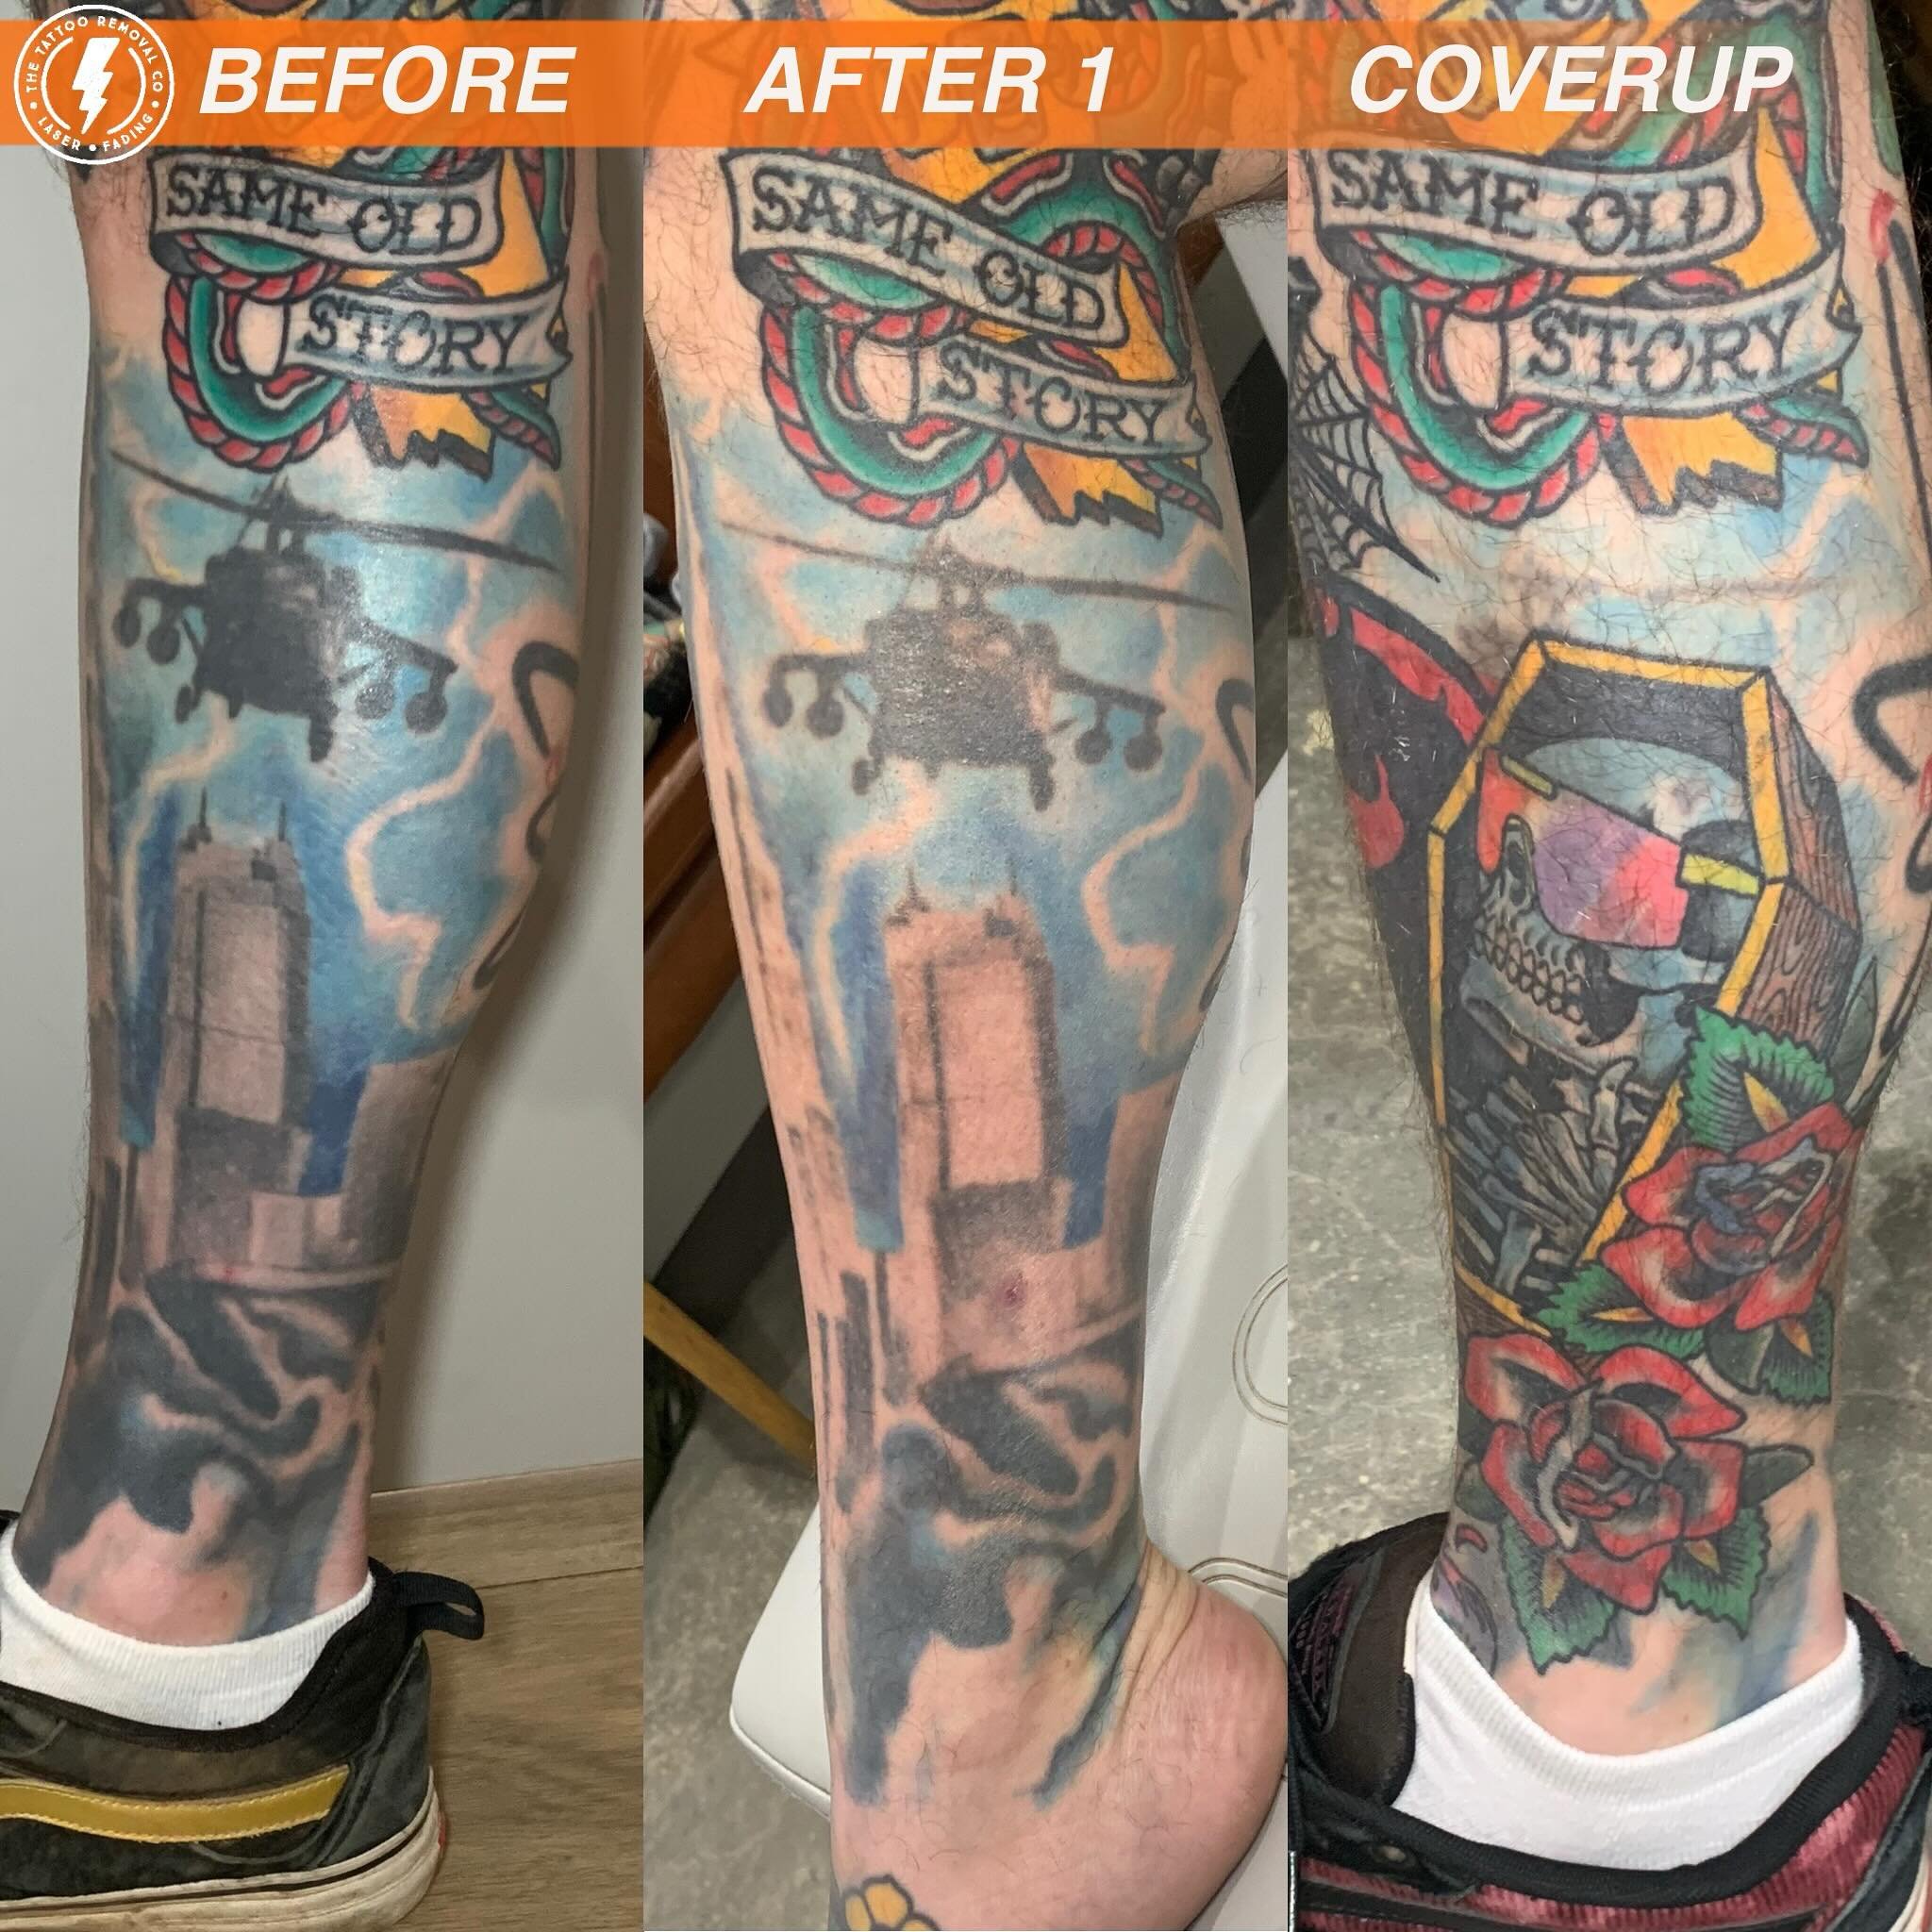 BEFORE/AFTER 1 TREATMENT/COVERUP💥

Get to the Choppa 🚁

Amazing coverup @jamieangustattoo 

Sometimes with coverups you can actually use the original tattoo to help with creating new tattoos. This piece the blue was still used as the backdrop.

⚡️F